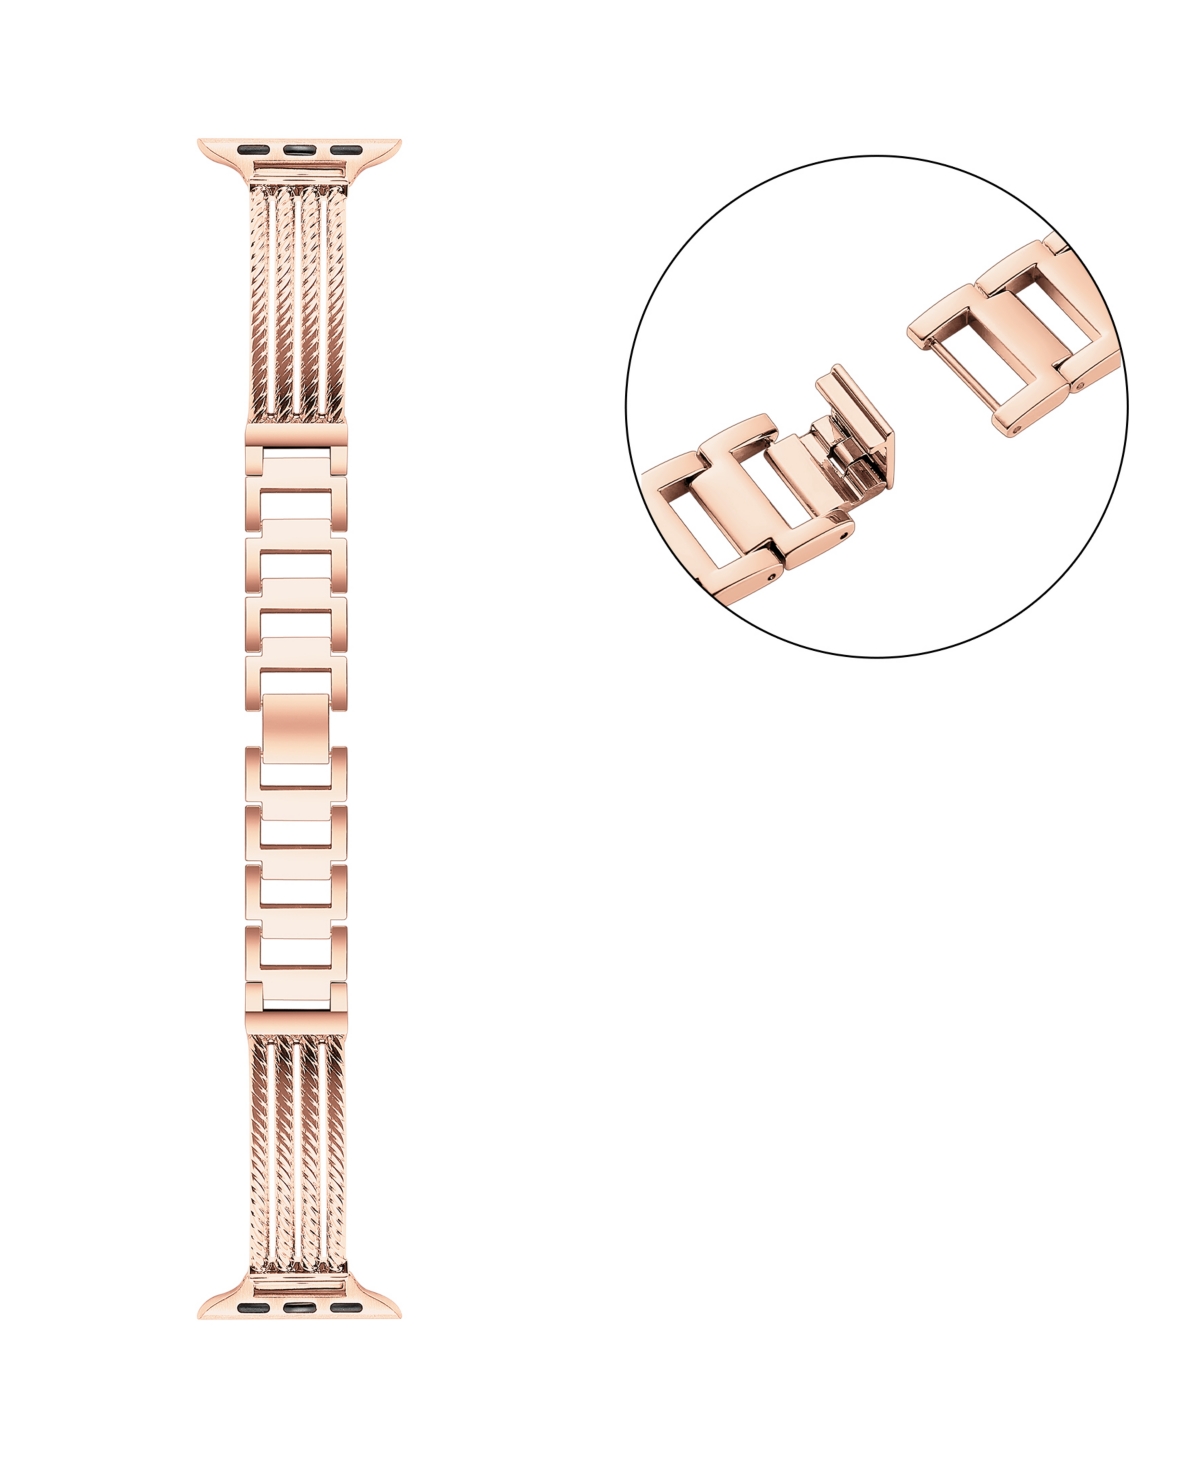 Shop Posh Tech Unisex Clara Stainless Steel Bracelet Band For Apple Watch Size-42mm,44mm,45mm,49mm In Gold